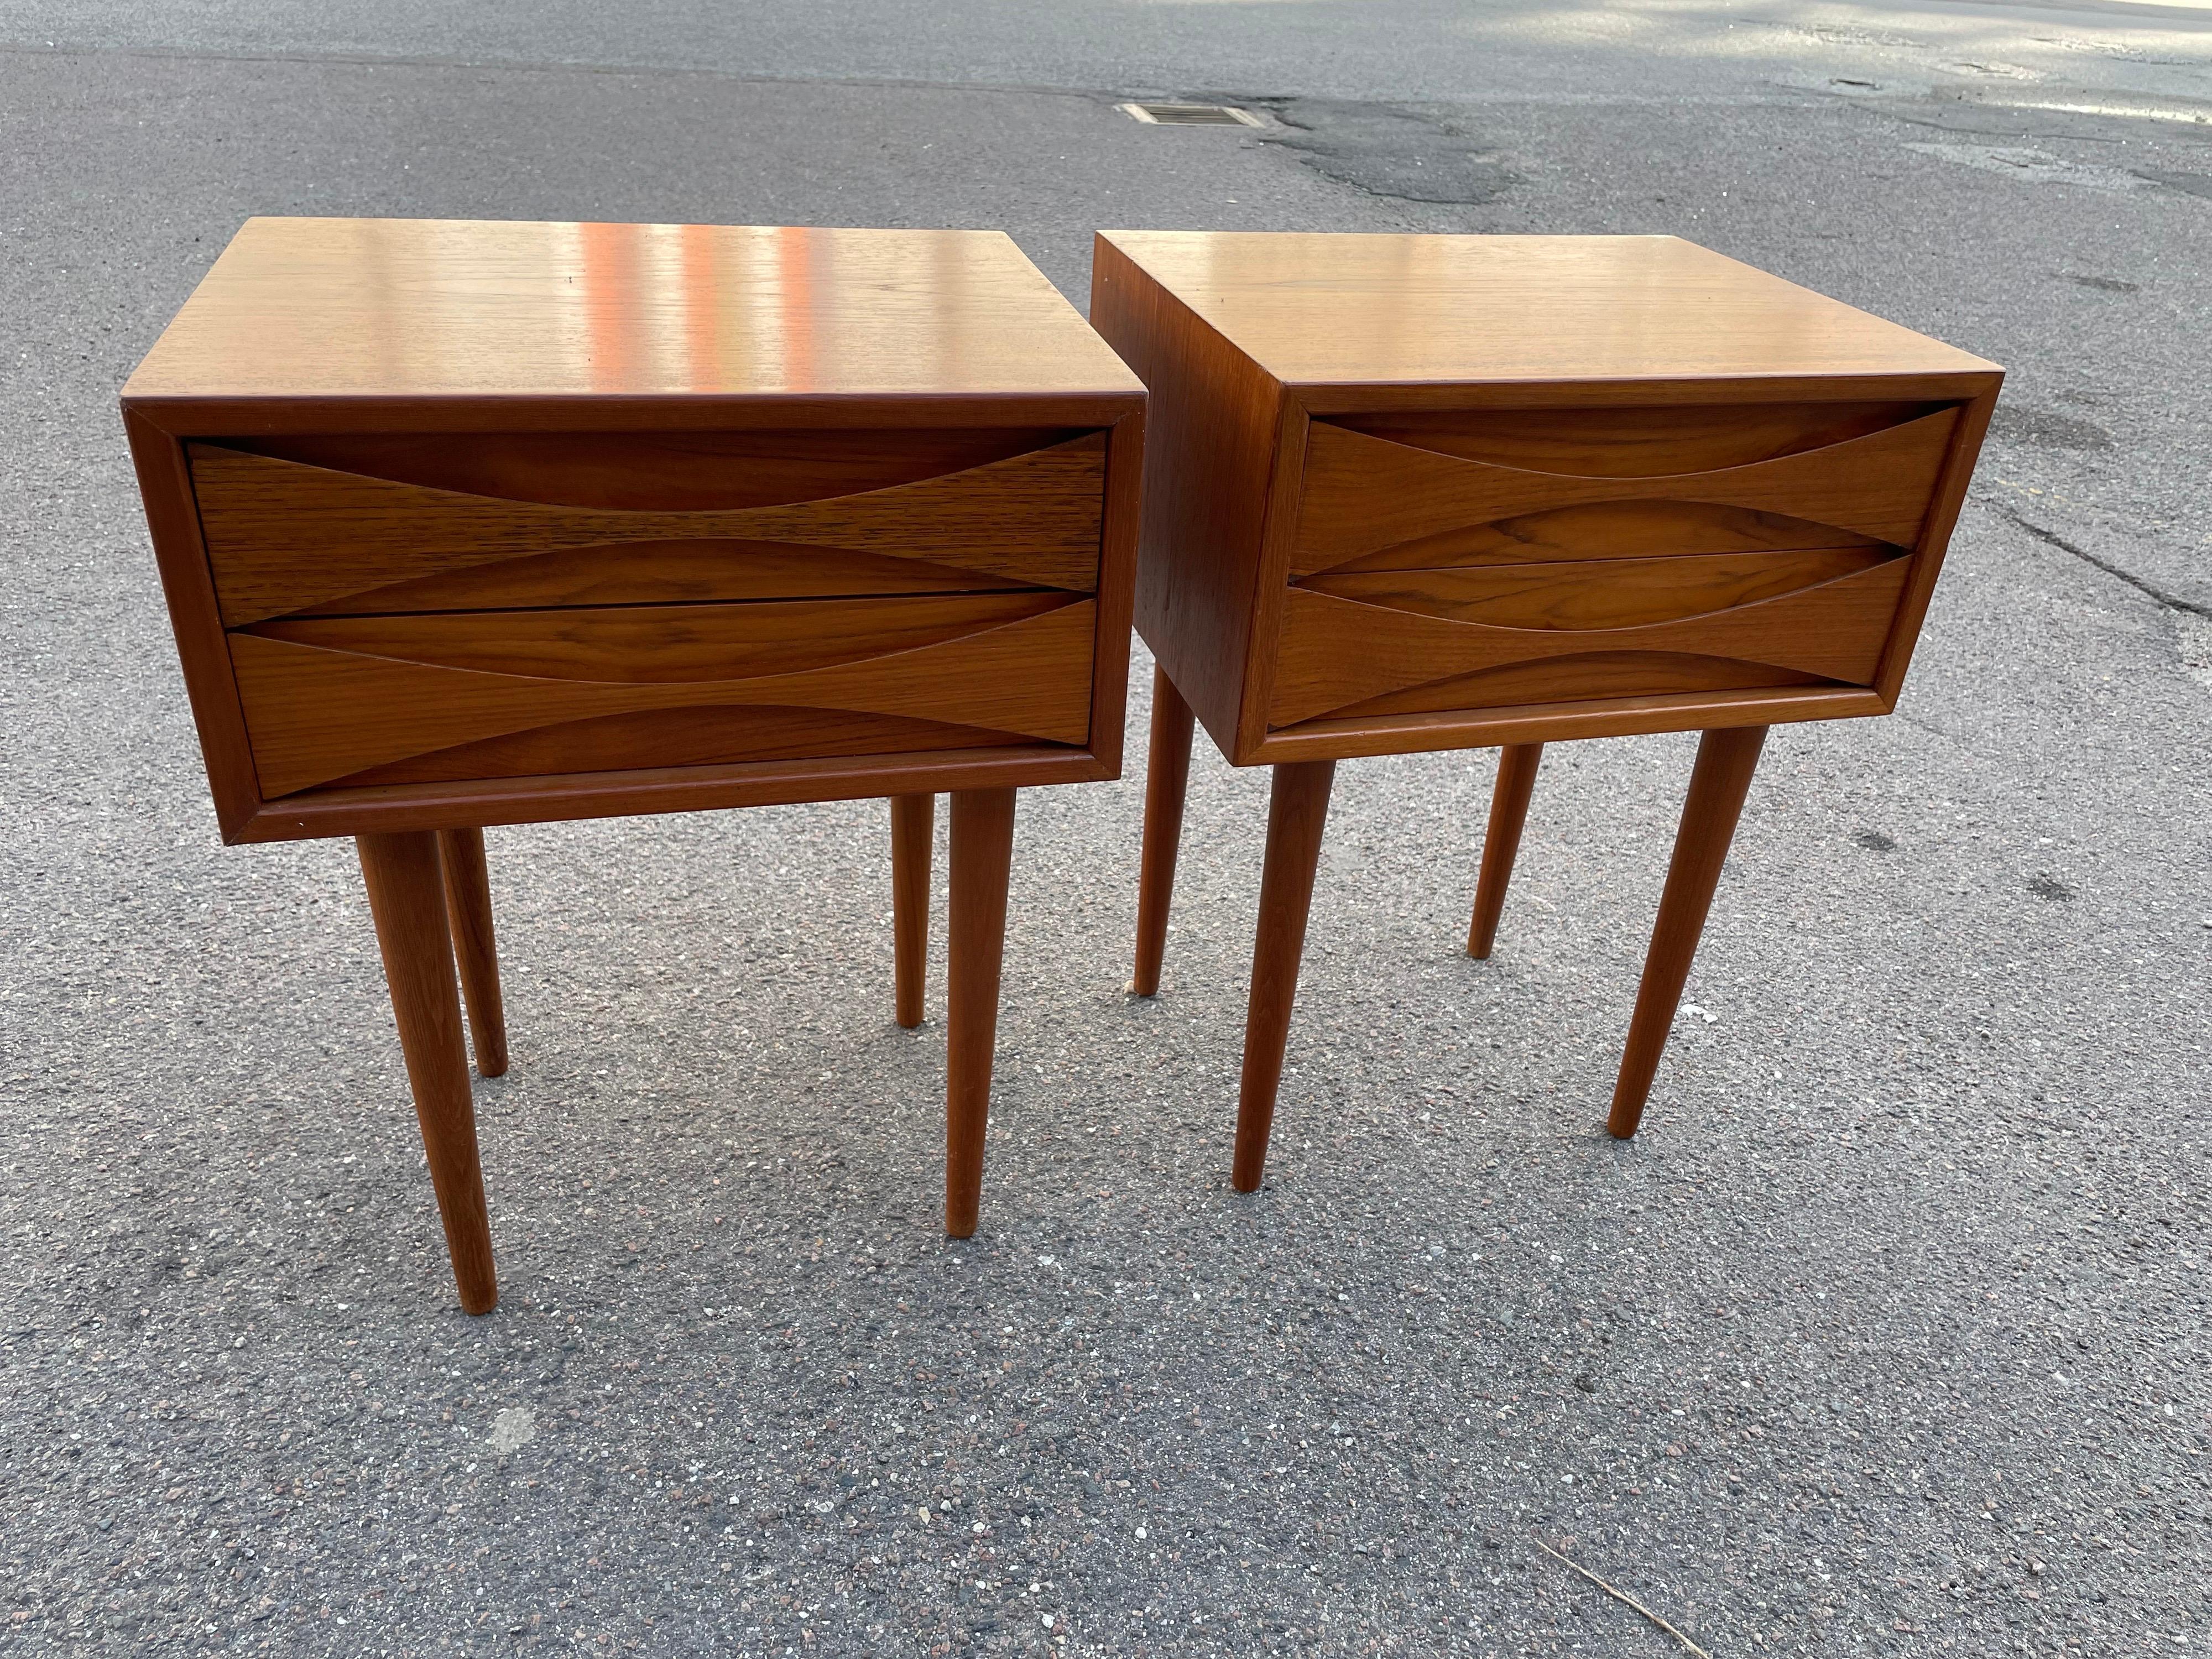 Mid Century-Modern teak cabinets by Niels Clausen for NC Mobler, Odense, Denmark. Produced c1960. Two drawers per cabinet with scalloped pulls and solid tapered legs.